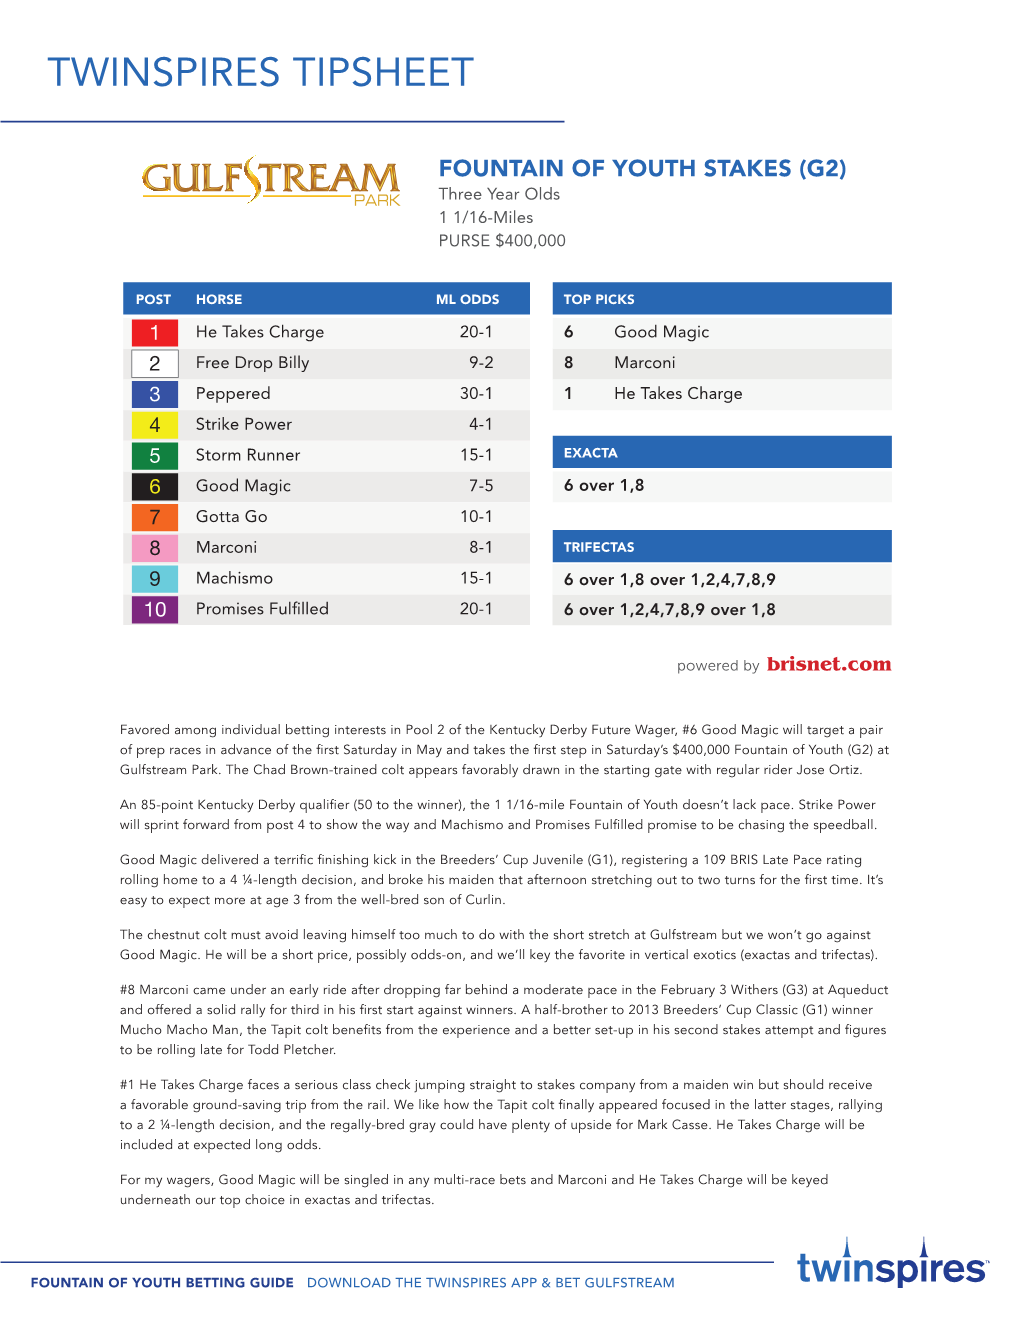 2018 Fountain of Youth Stakes Tip Sheet